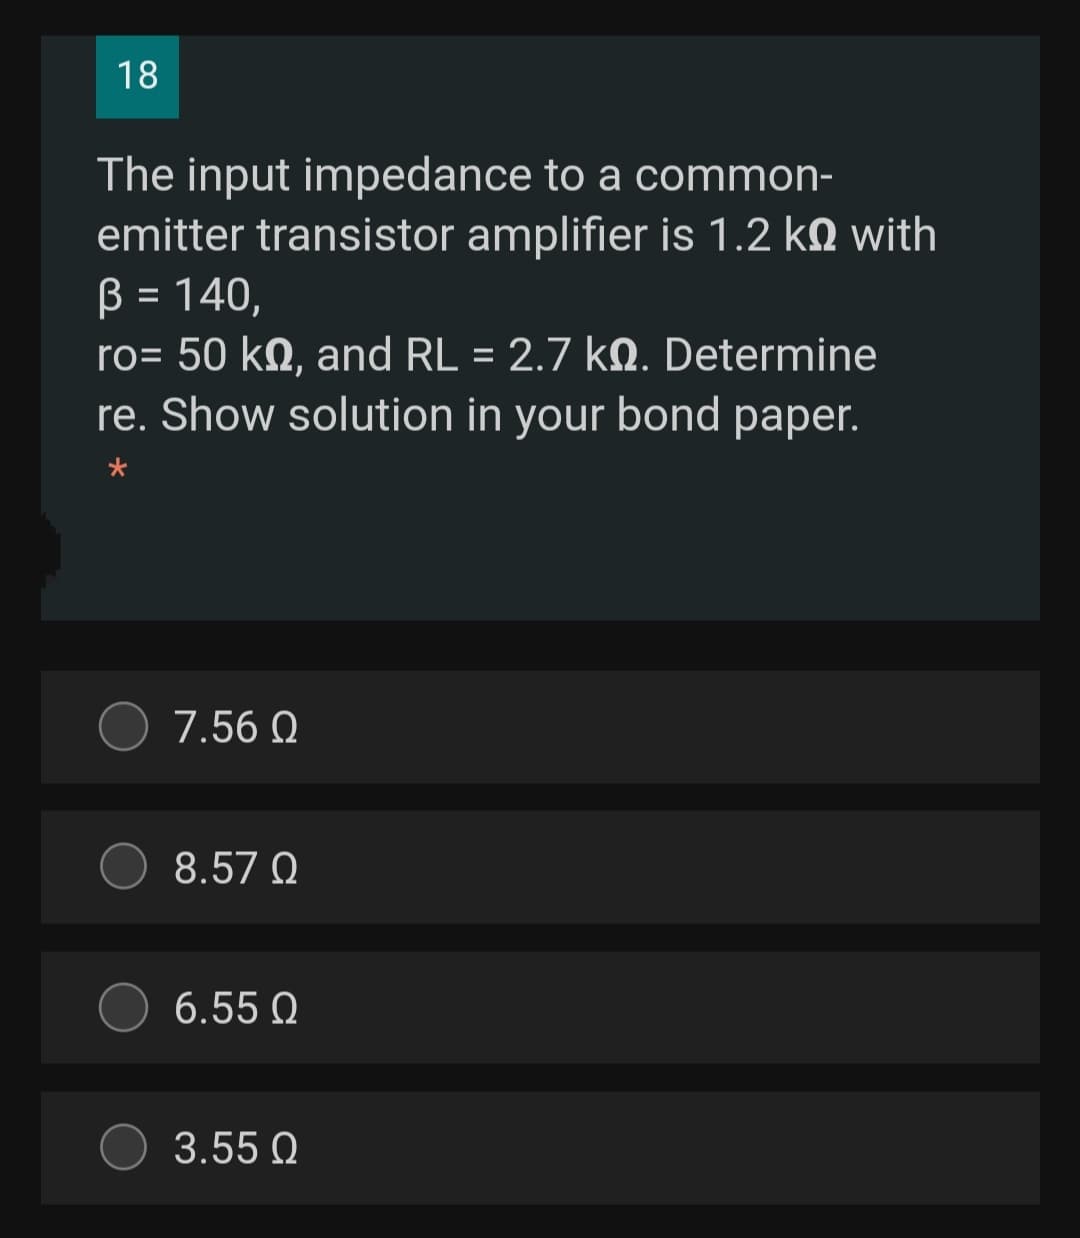 18
The input impedance to a common-
emitter transistor amplifier is 1.2 kN with
B = 140,
ro= 50 kN, and RL = 2.7 kM. Determine
re. Show solution in your bond paper.
%3D
7.56 Q
8.57 Q
6.55 Q
3.55 Q
